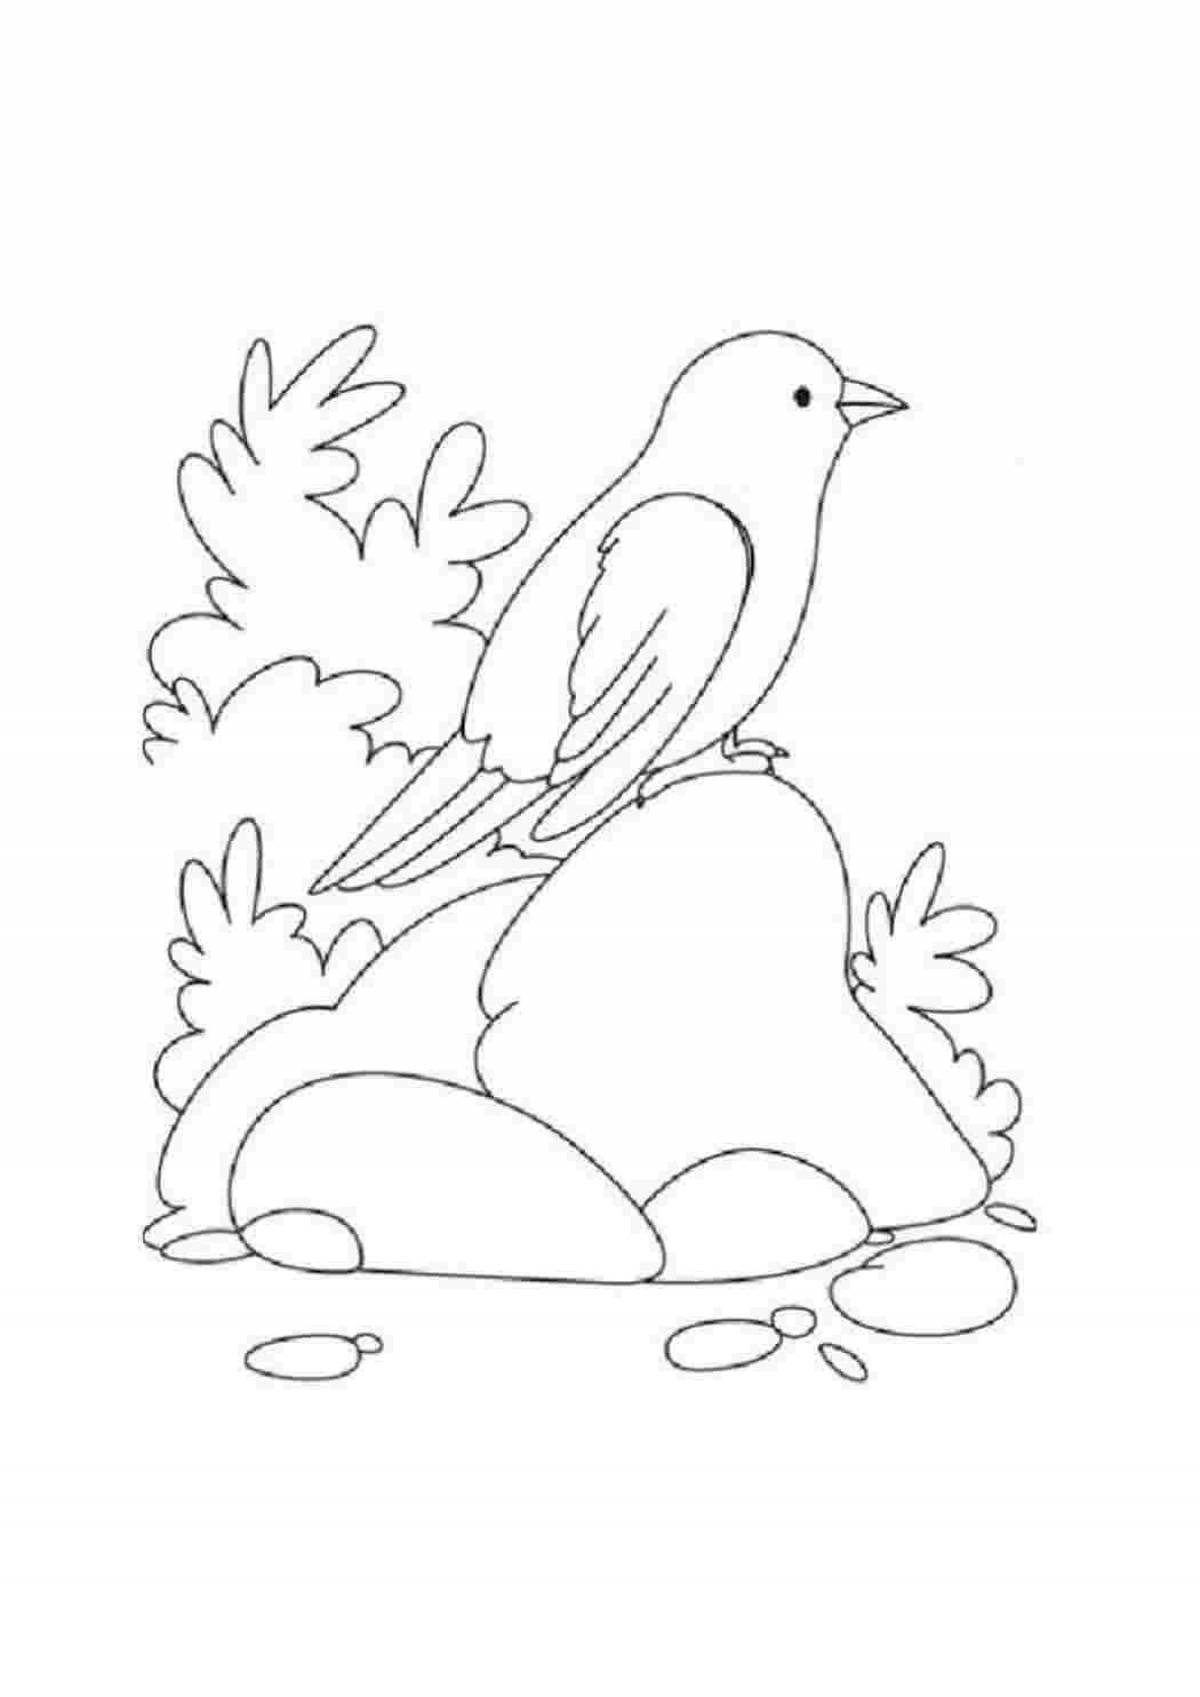 Colourful disheveled sparrow coloring page